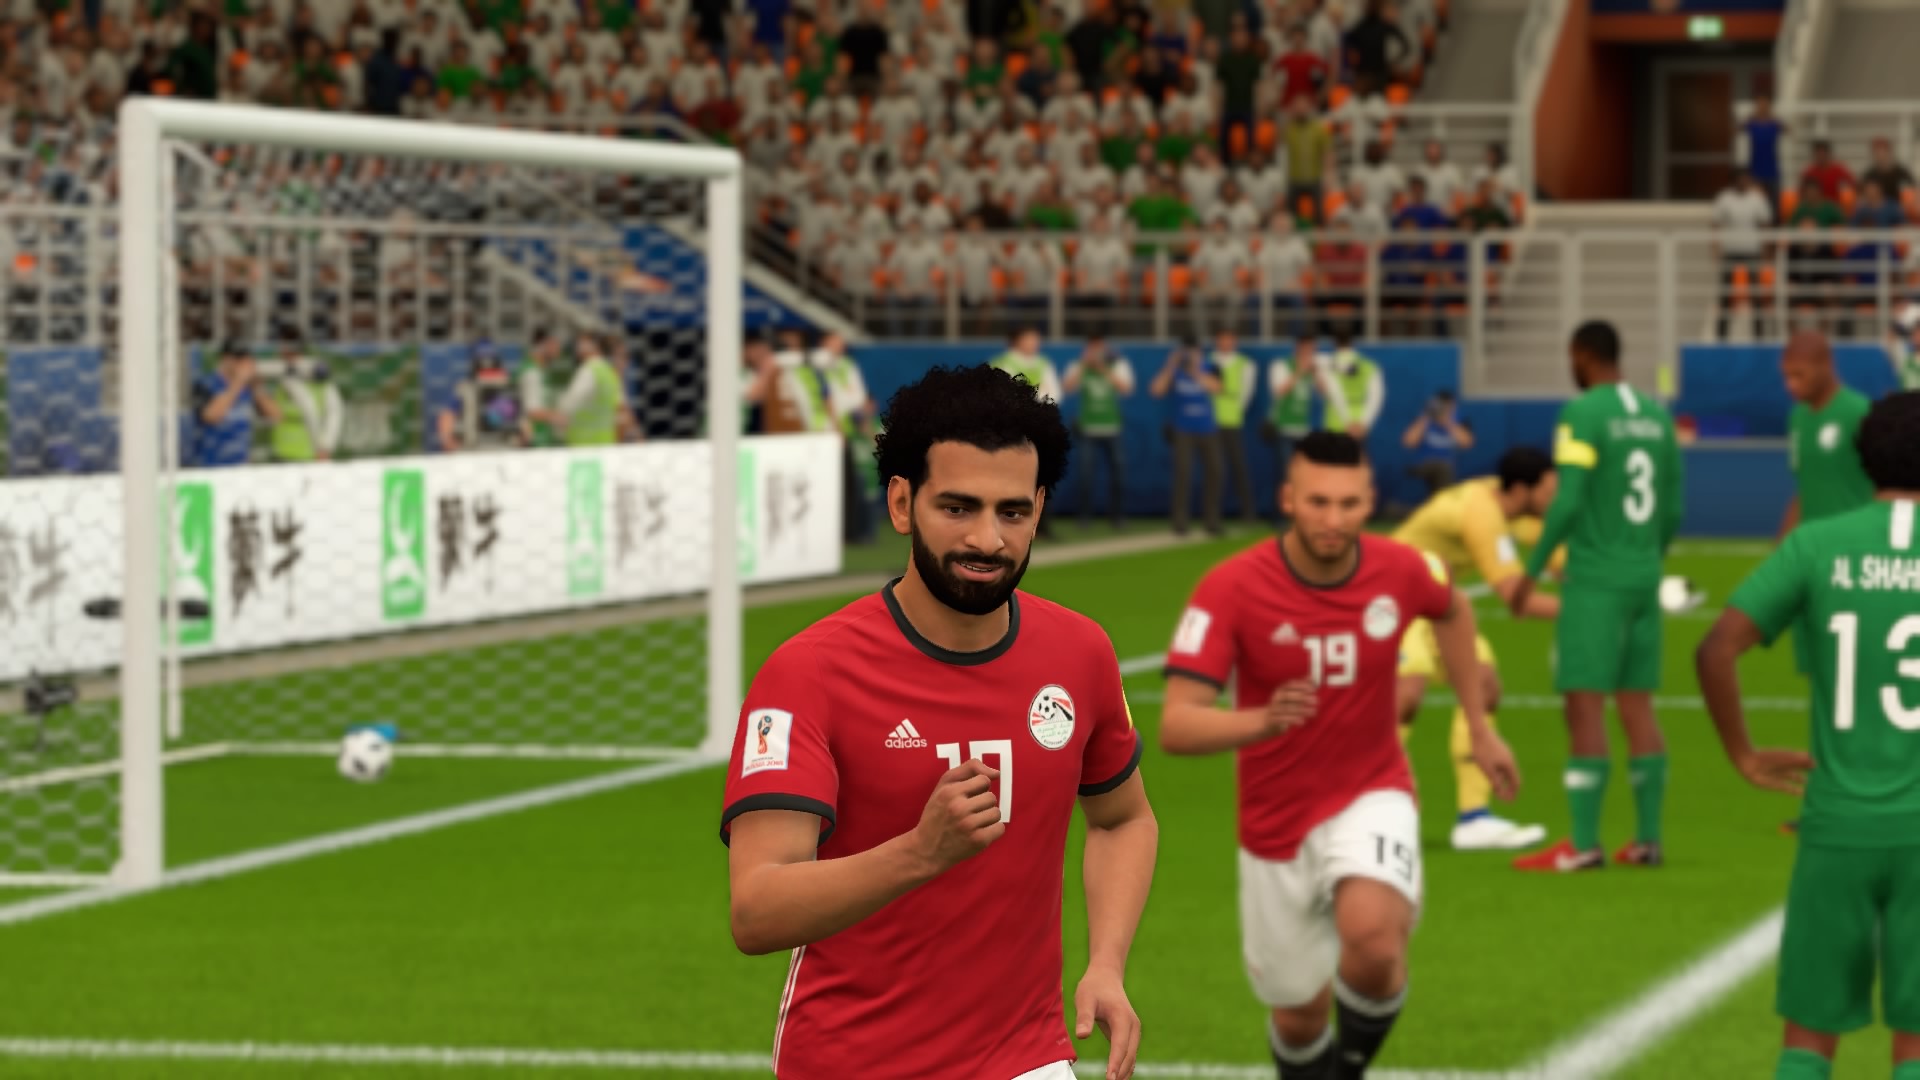  FIFA 18 Standard Edition World Cup Update - PlayStation 4 :  Video Games